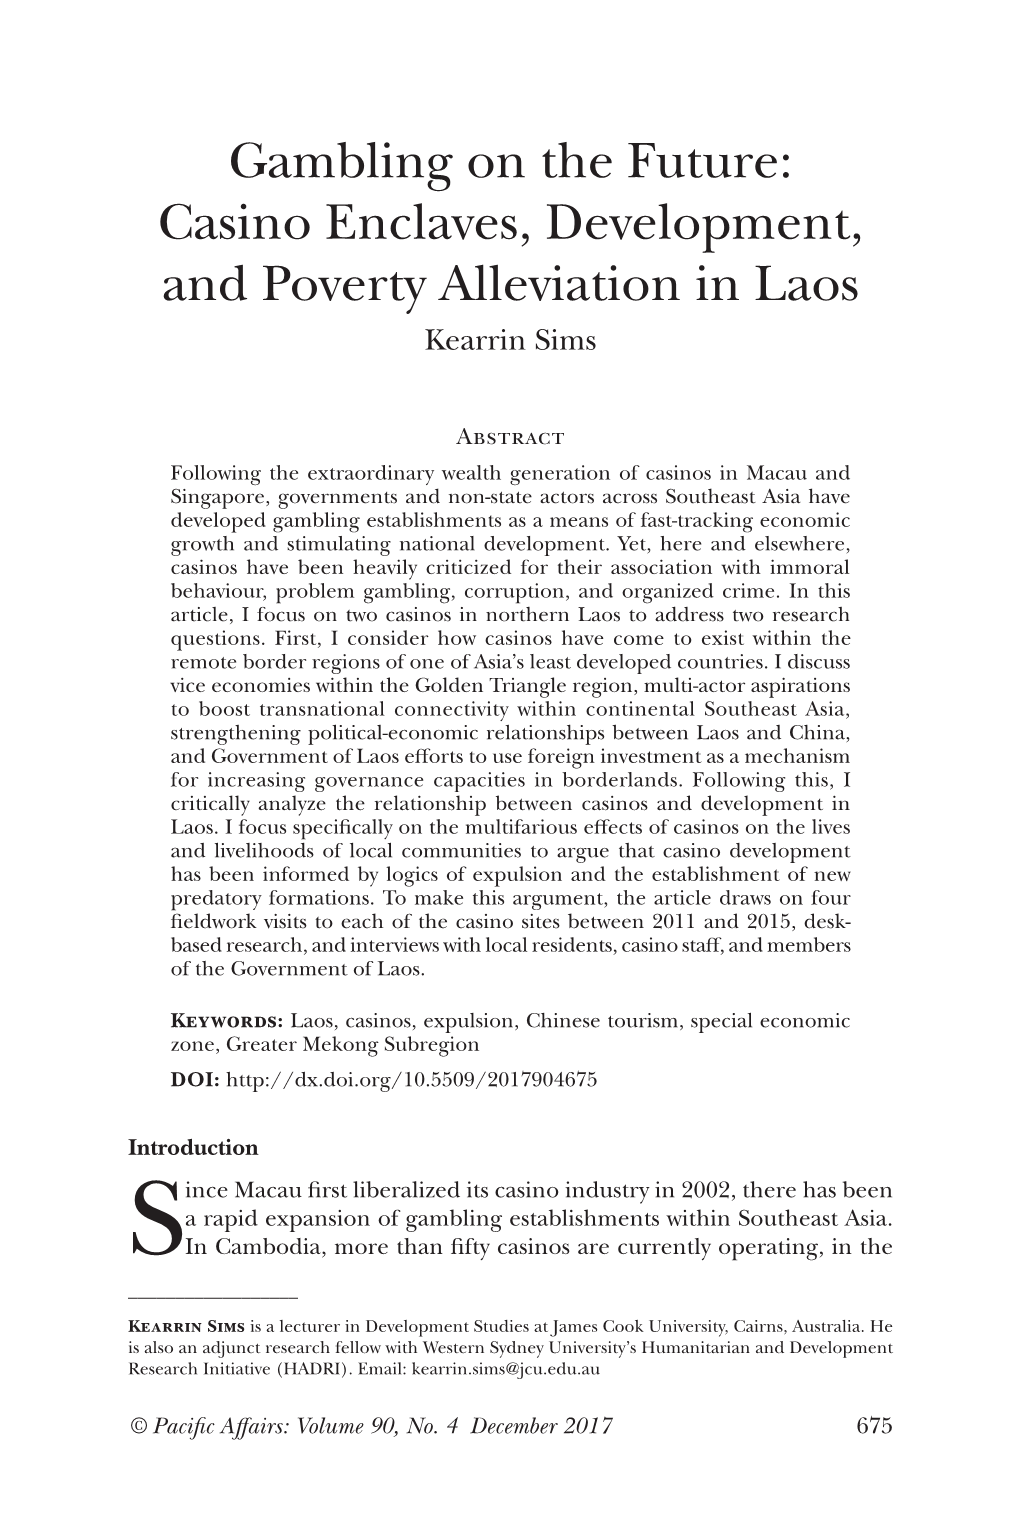 Gambling on the Future: Casino Enclaves, Development, and Poverty Alleviation in Laos Kearrin Sims